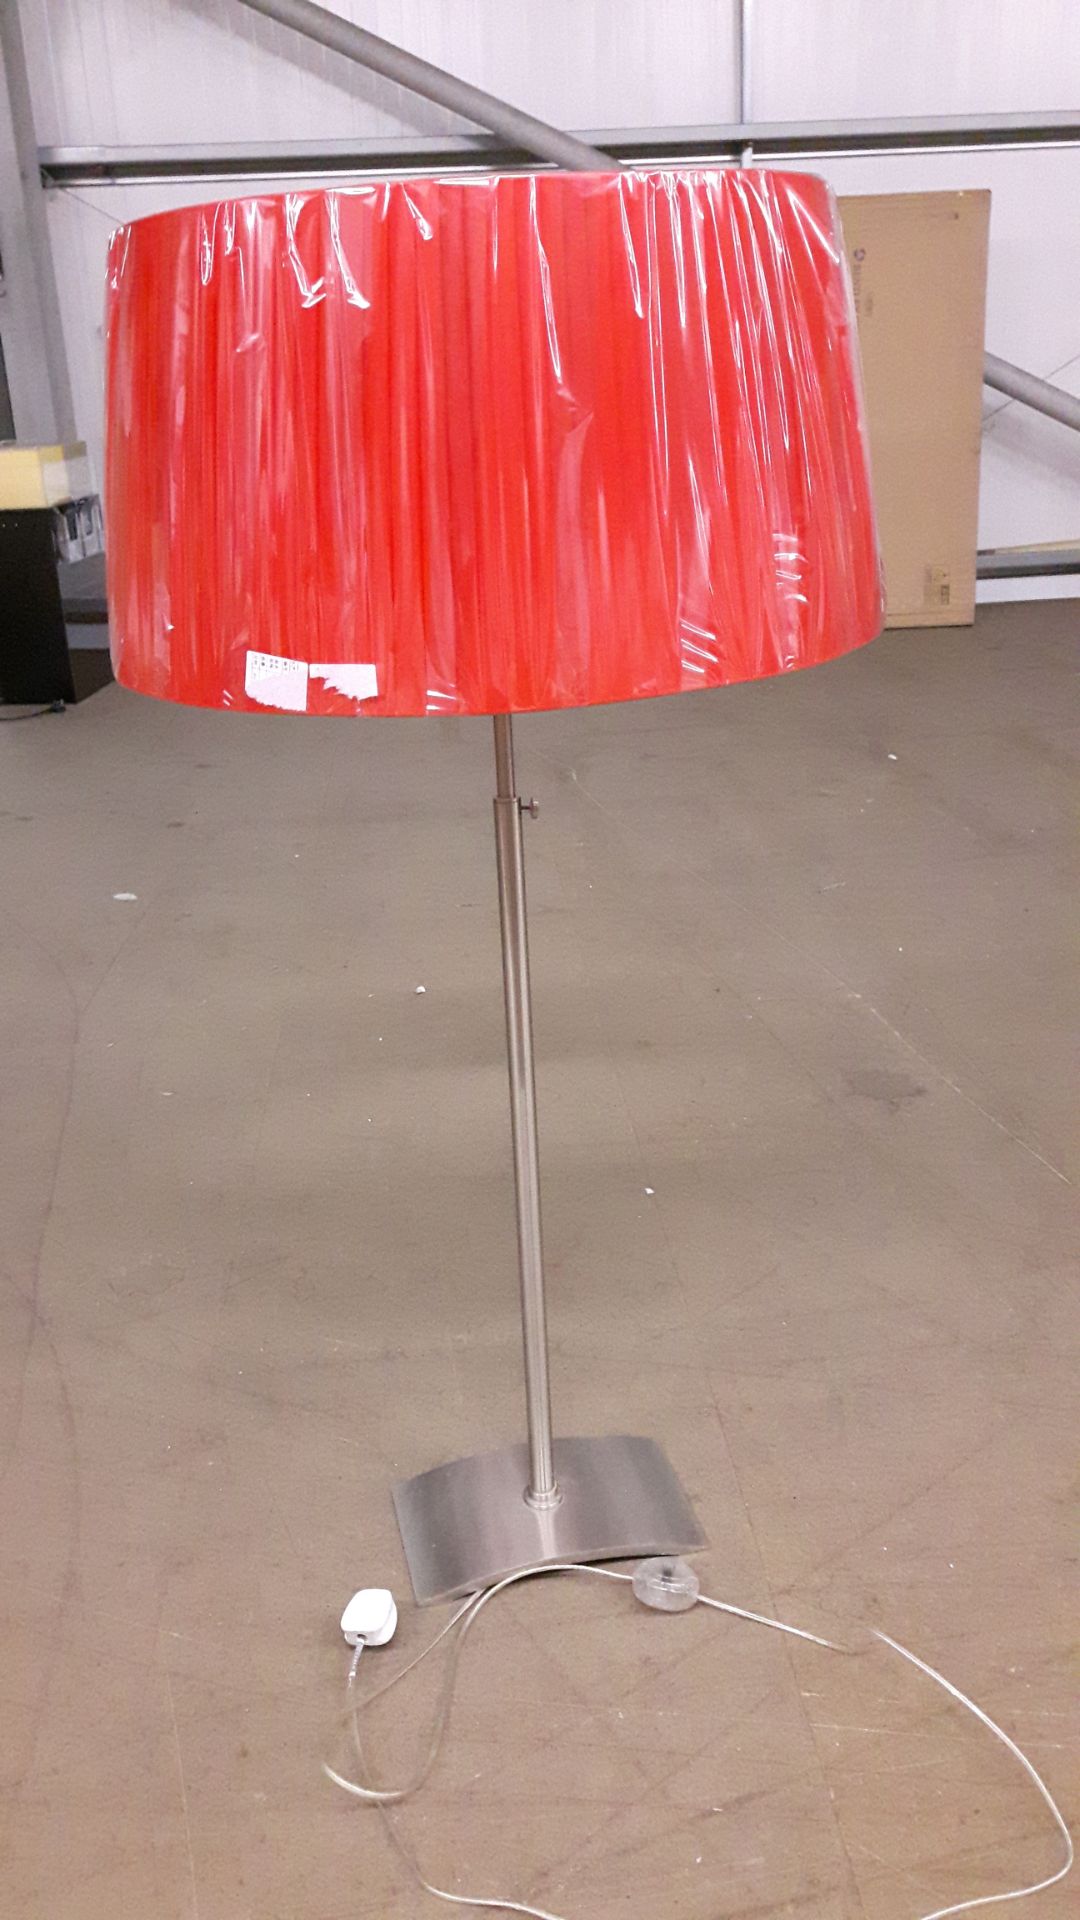 Adjustable stainless steel Floor Lamp with new red shade. - Image 3 of 3